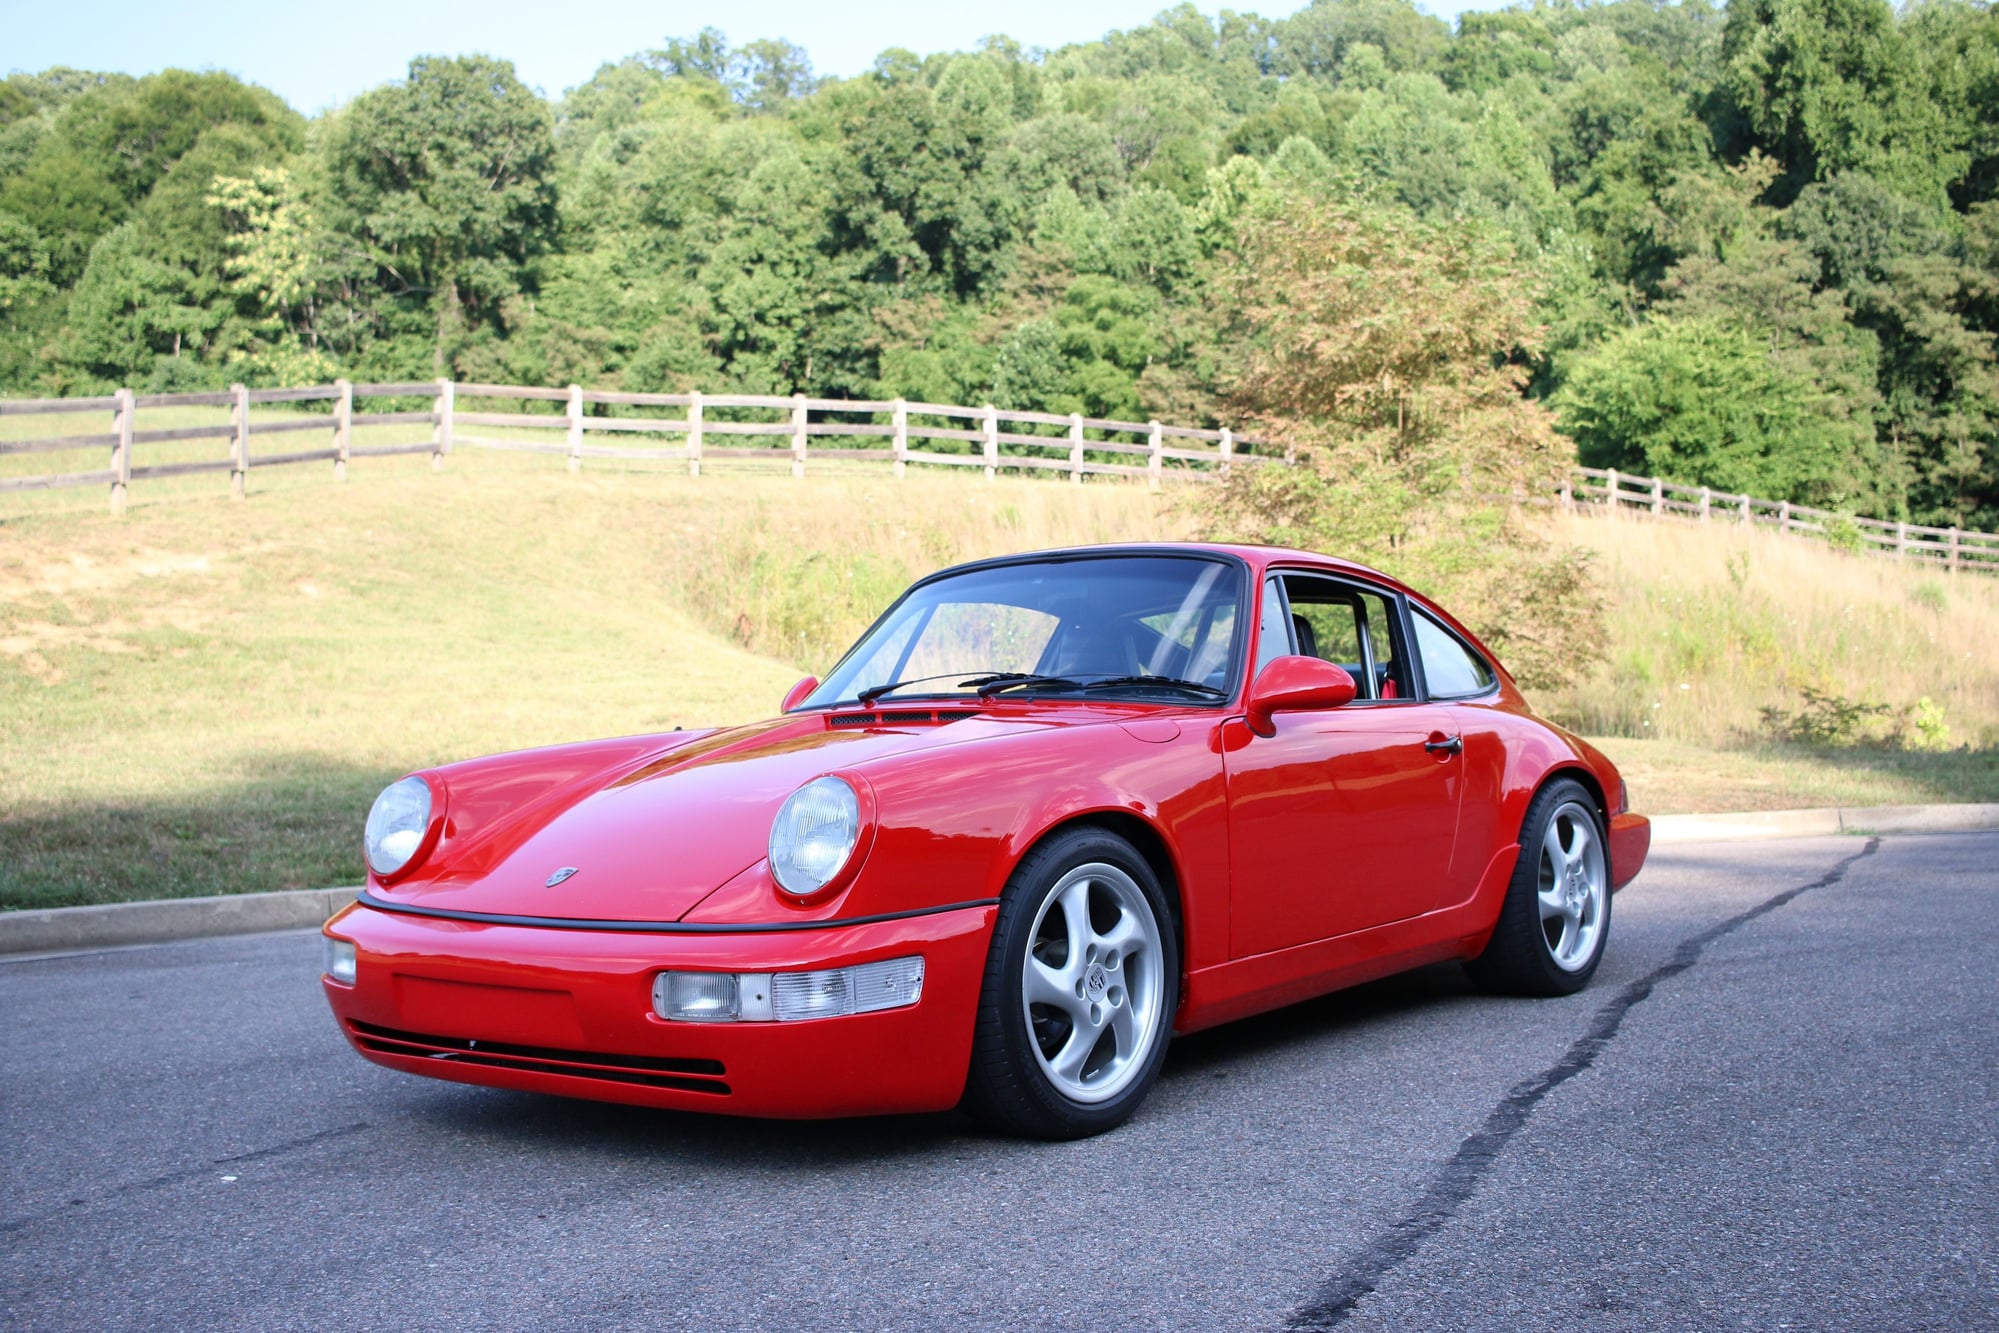 1979 Porsche 911 - Modified 1979 Porsche 911 SC - Used - VIN 9119200514 - 219,800 Miles - 6 cyl - 2WD - Manual - Coupe - Red - Kingsport, TN 37663, United States